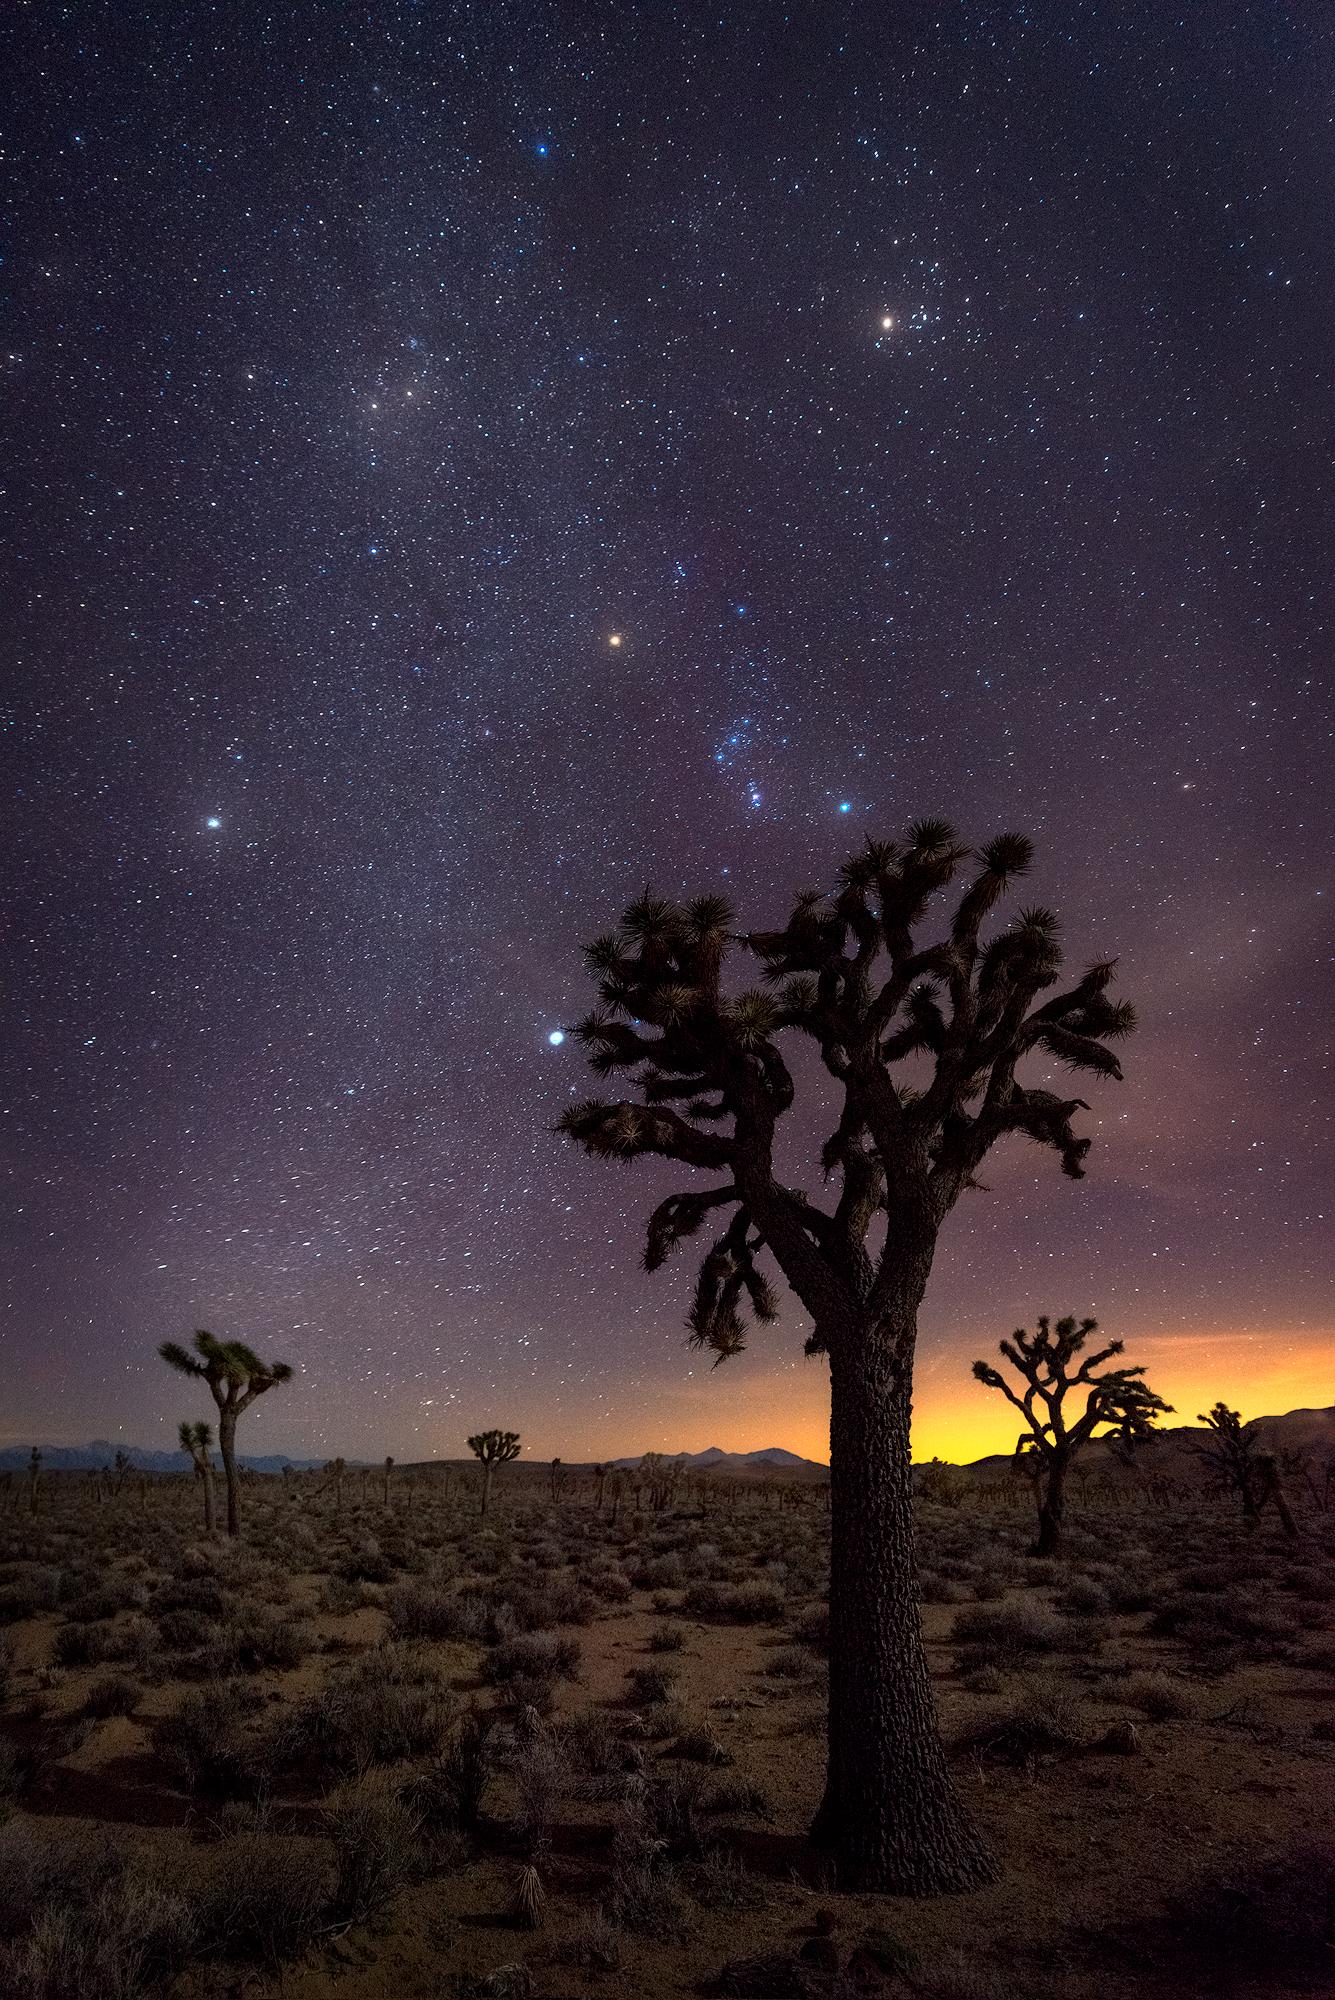 foot Joshua Trees silhouetted by our view of the cosmos. Death